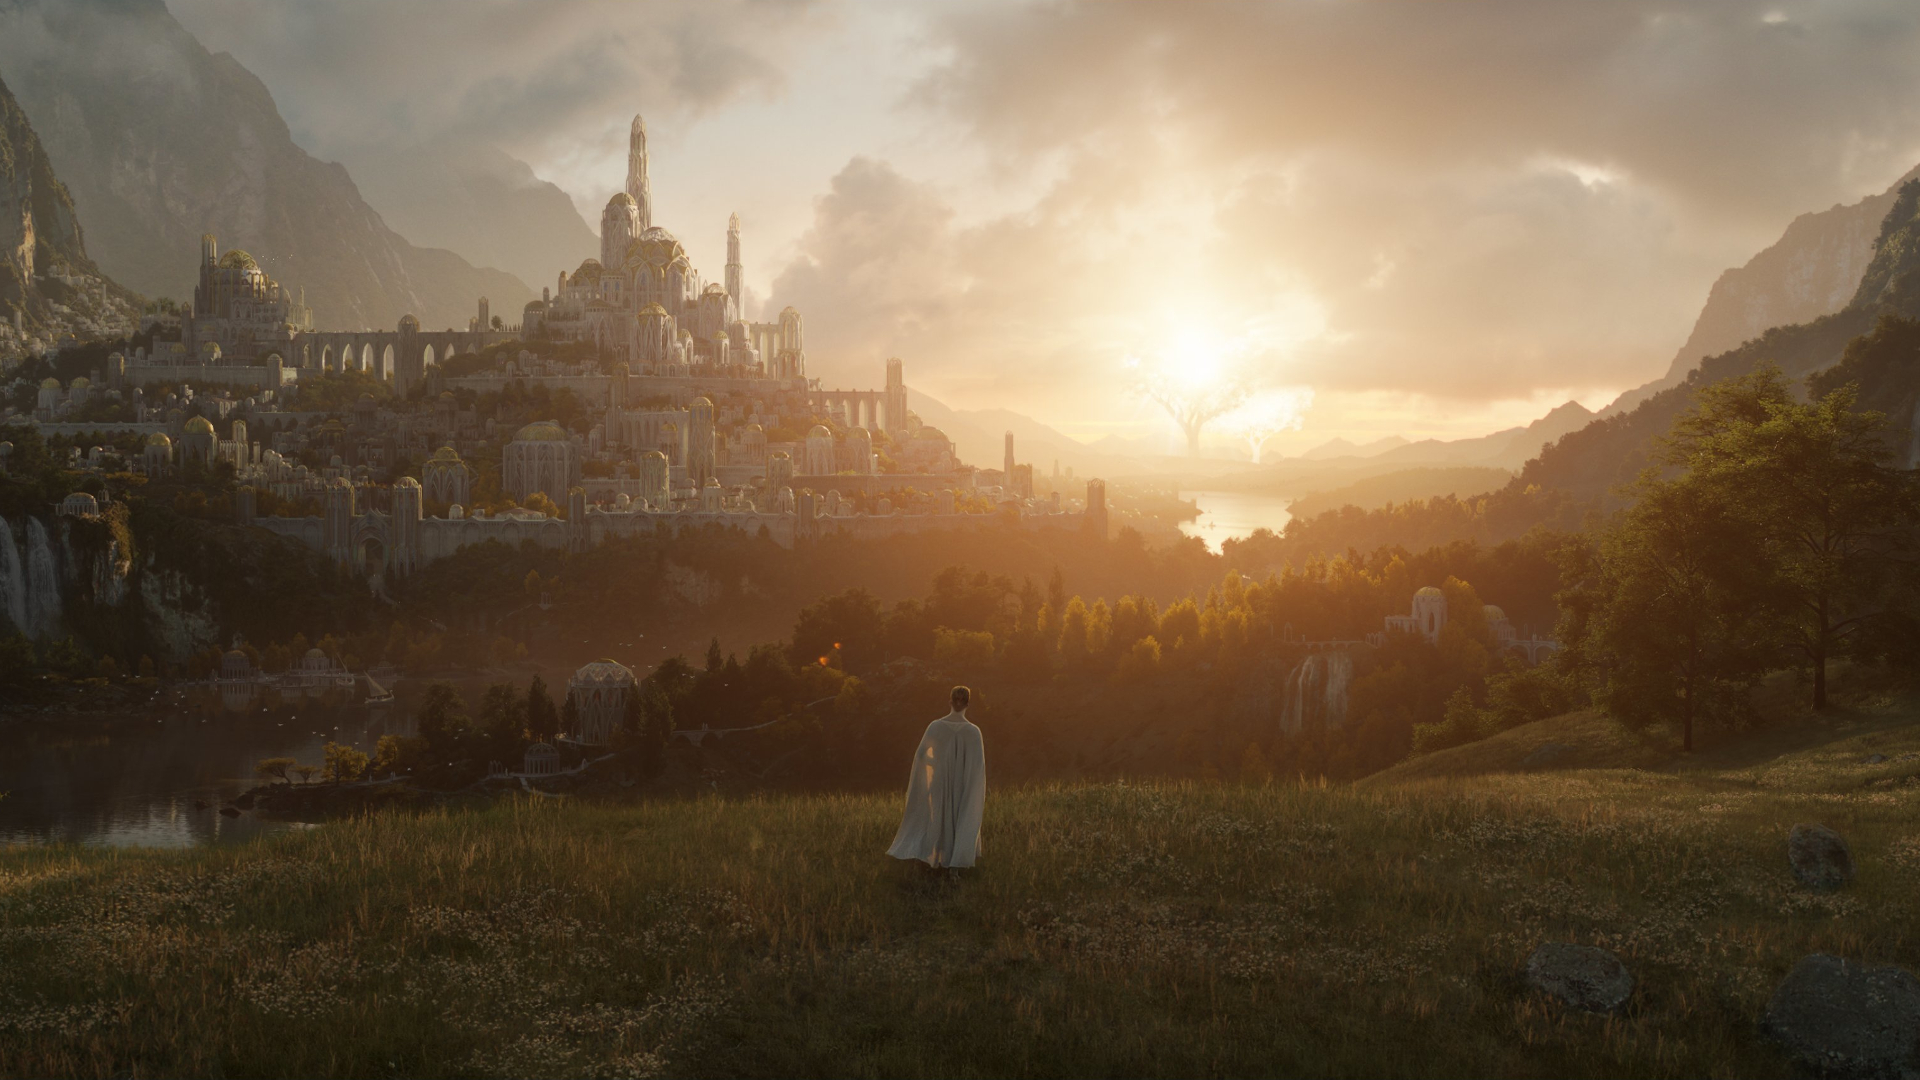  Here's your first look at The Lord of the Rings TV show 